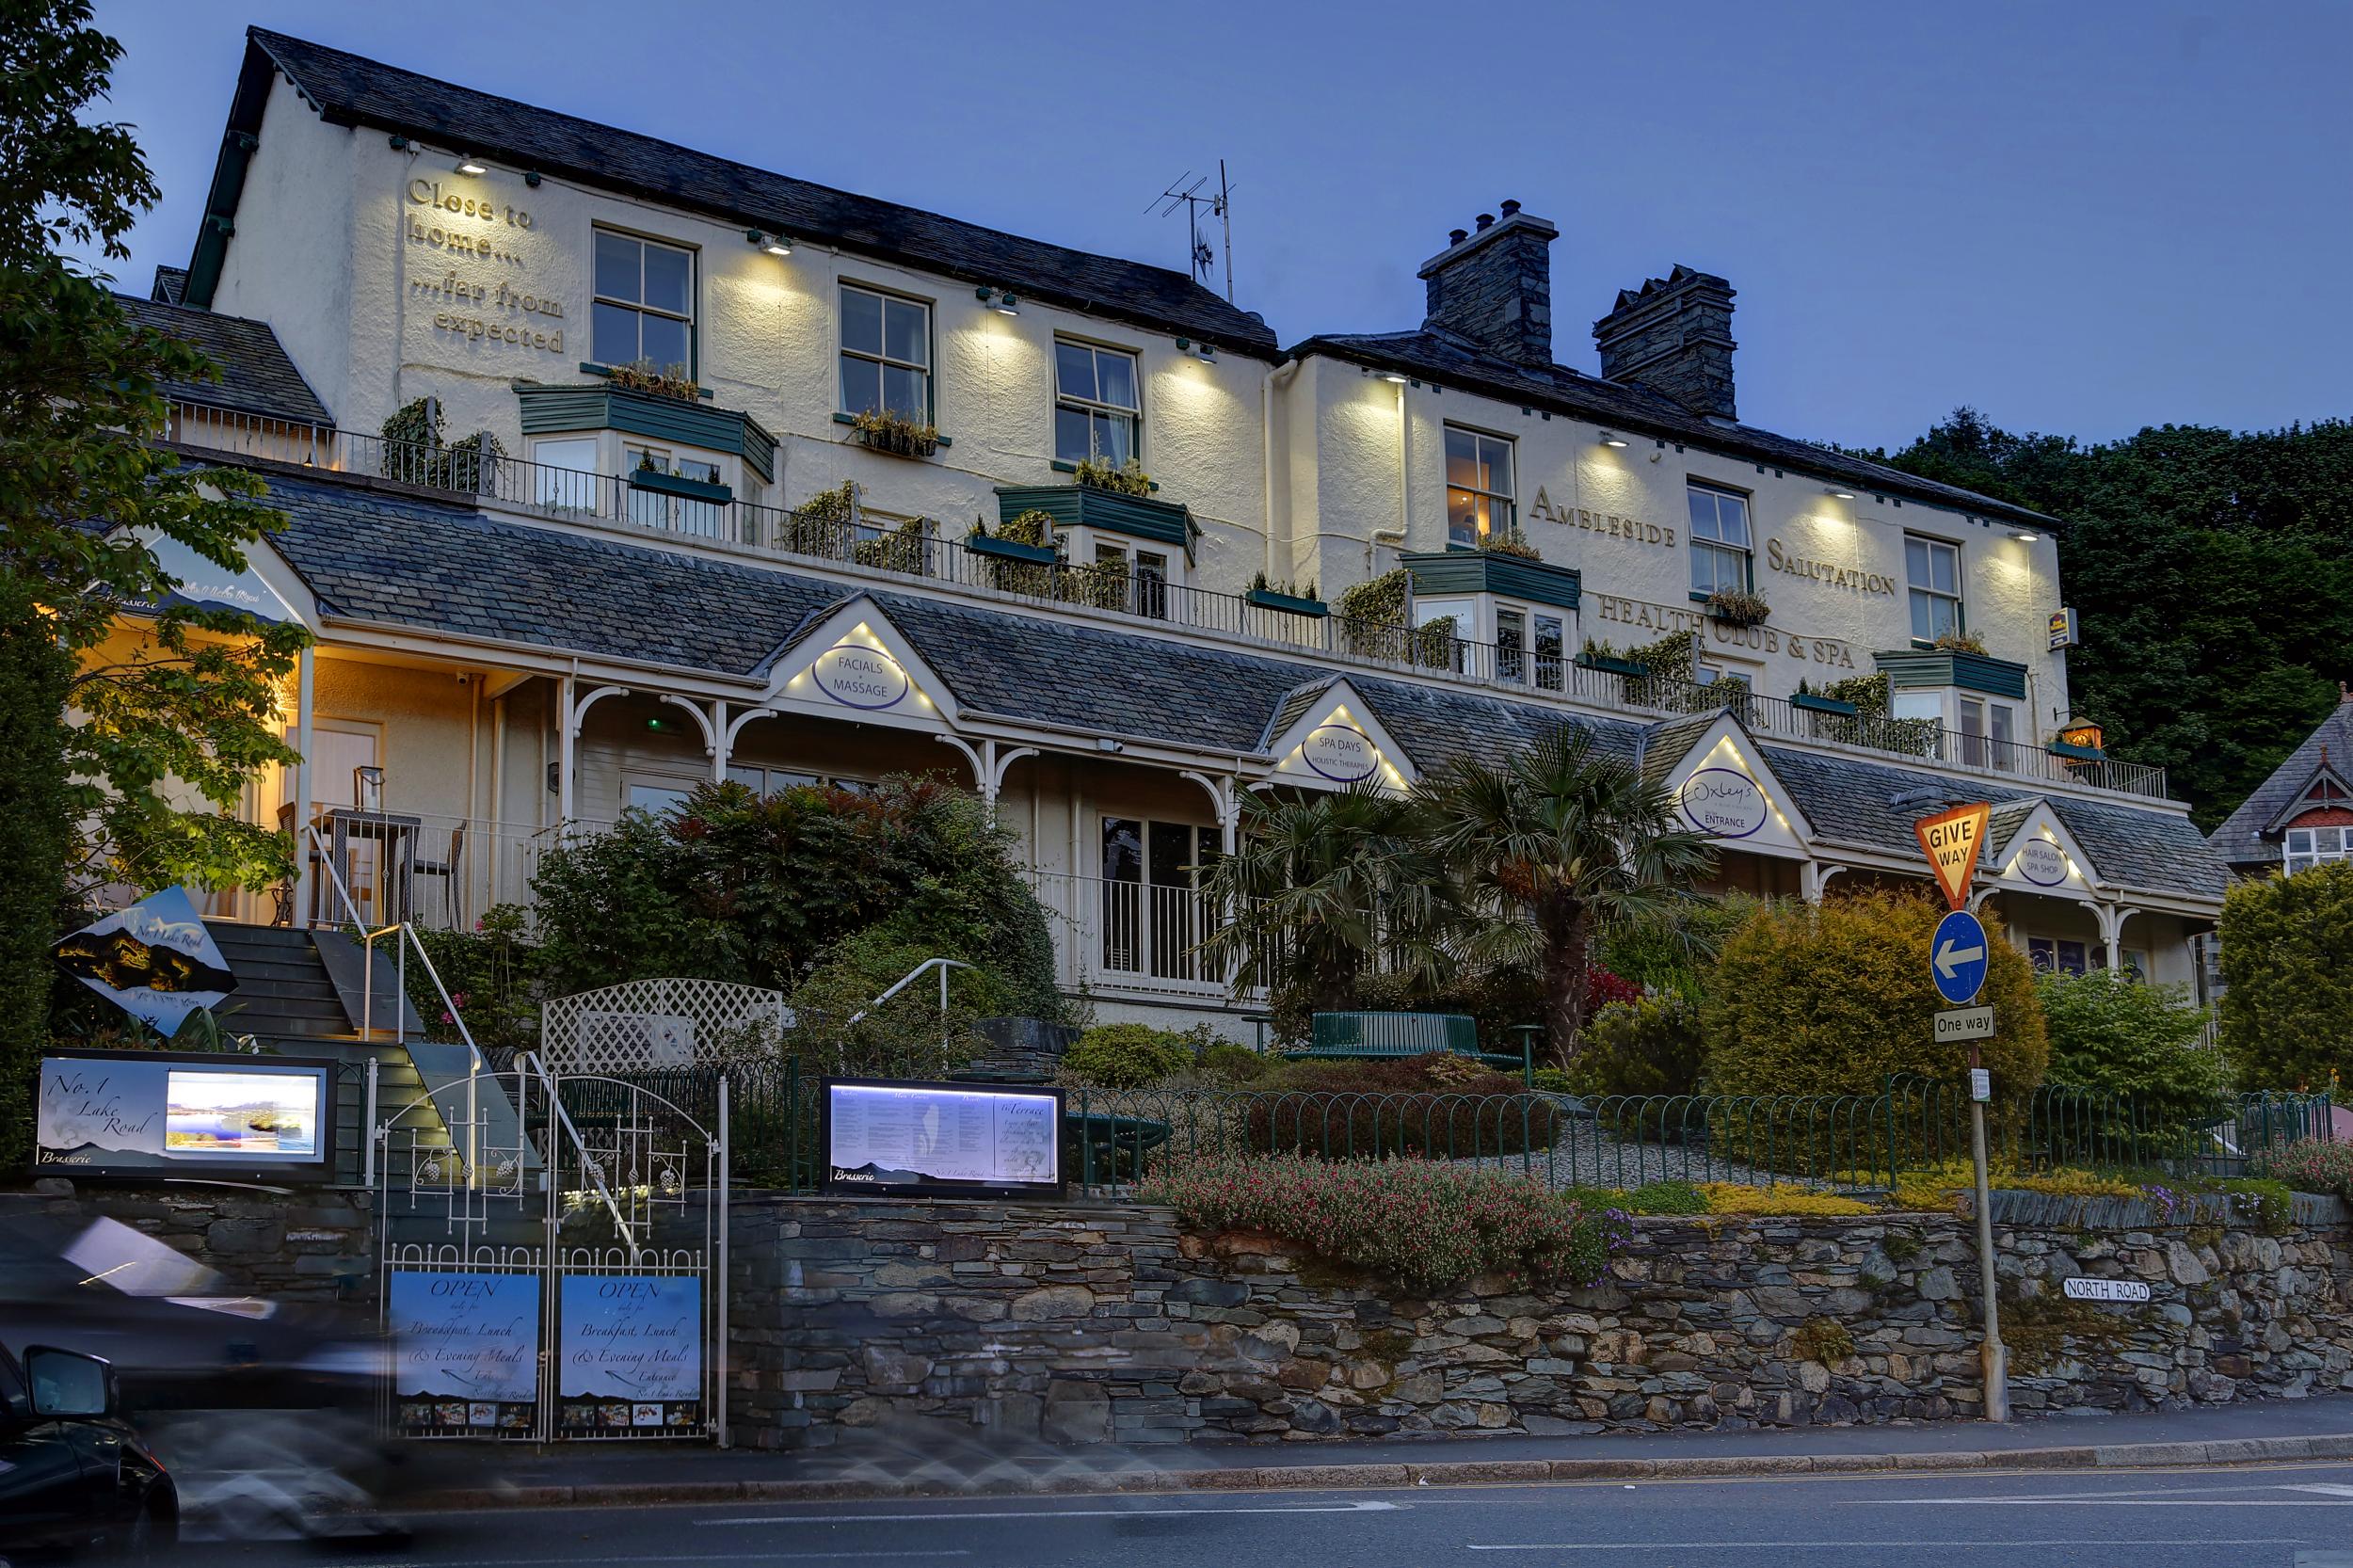 The route was created by the Ambleside Salutation hotel